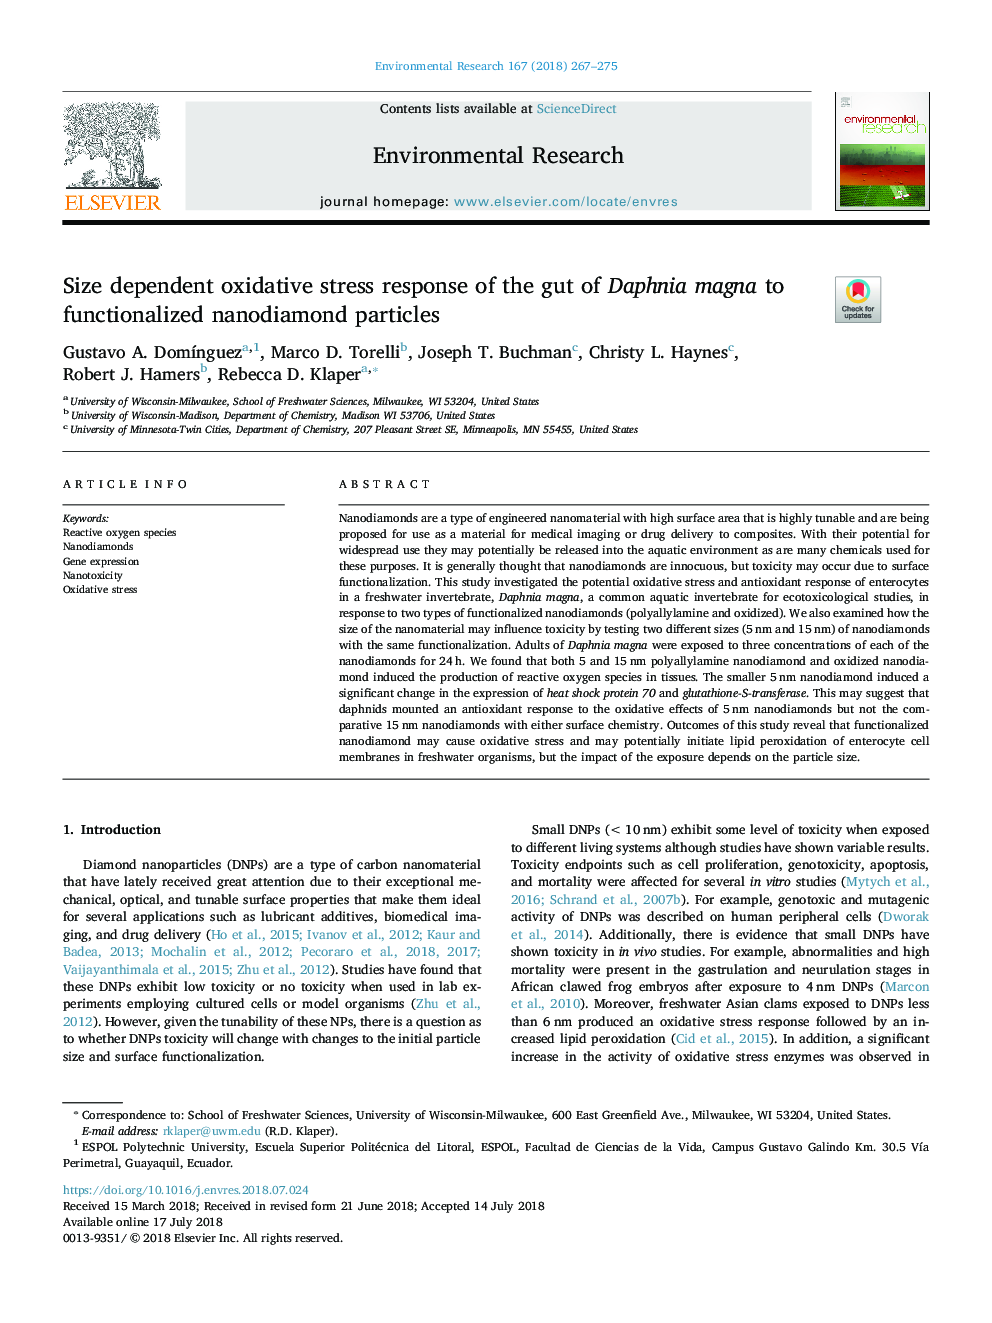 Size dependent oxidative stress response of the gut of Daphnia magna to functionalized nanodiamond particles